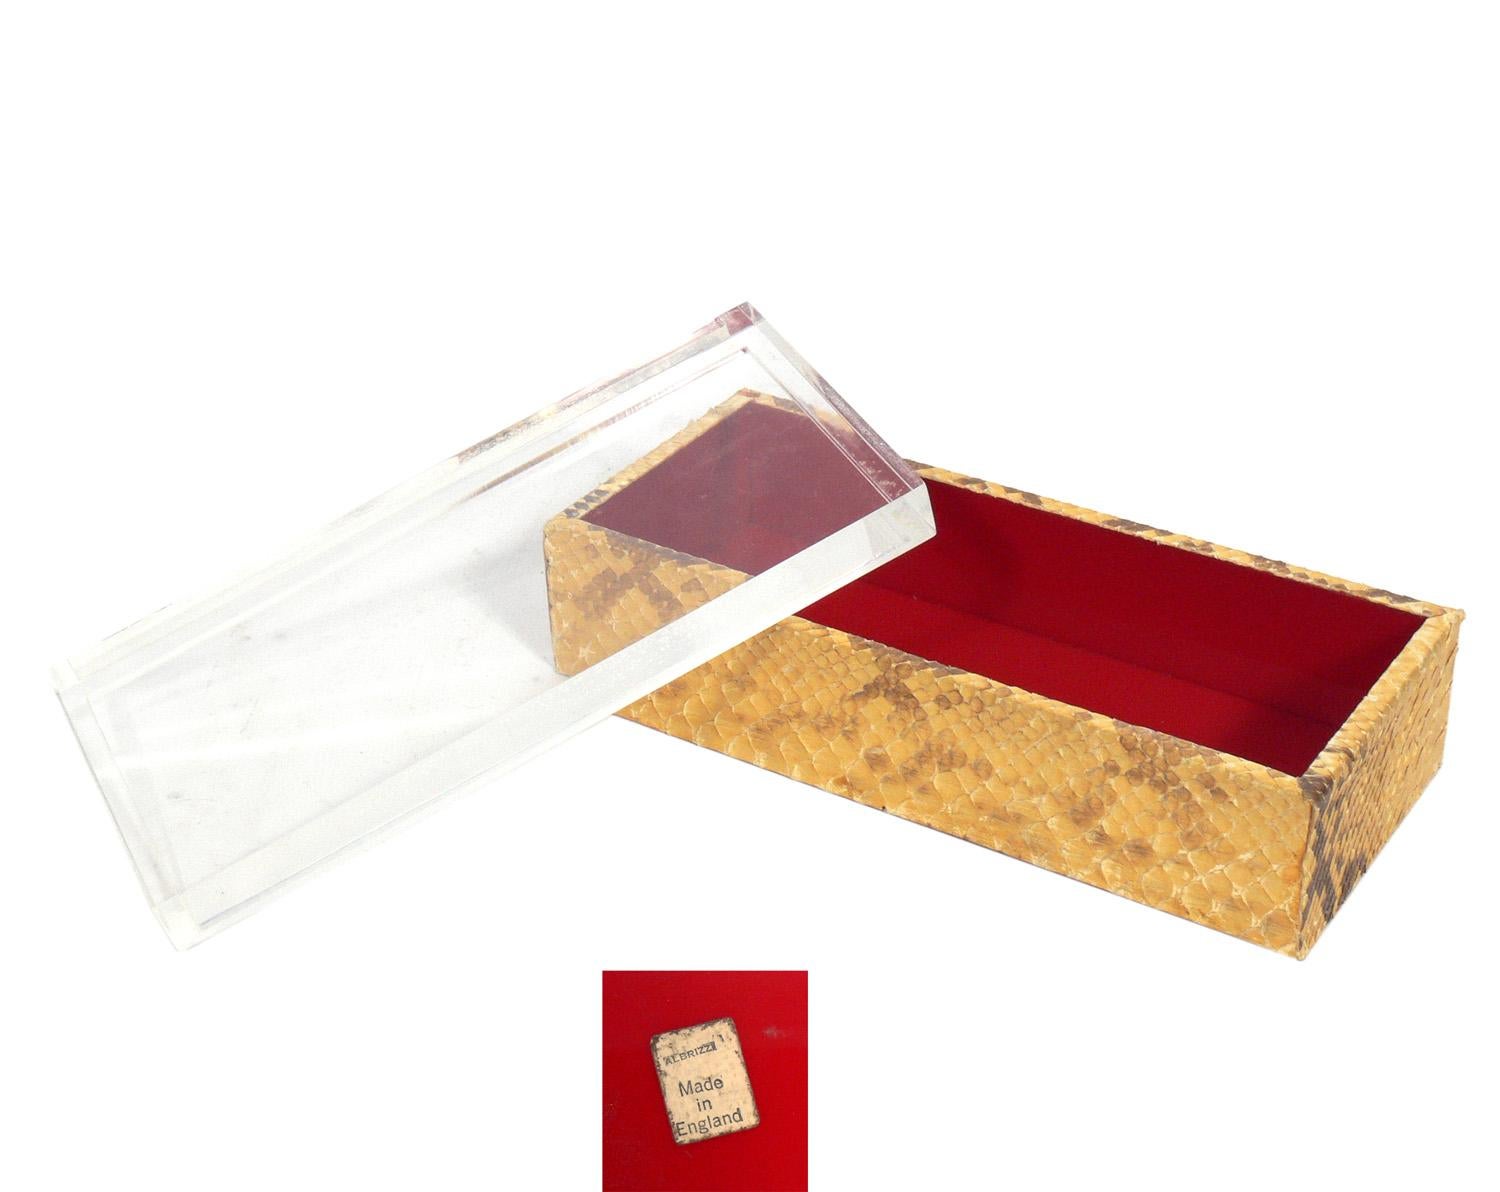 Selection of modernist boxes, circa 1950s-1980s. They are, from left to right as seen in the first photo:
1) Python skin and lucite red lacquered box, England, circa 1950s. It measures 3